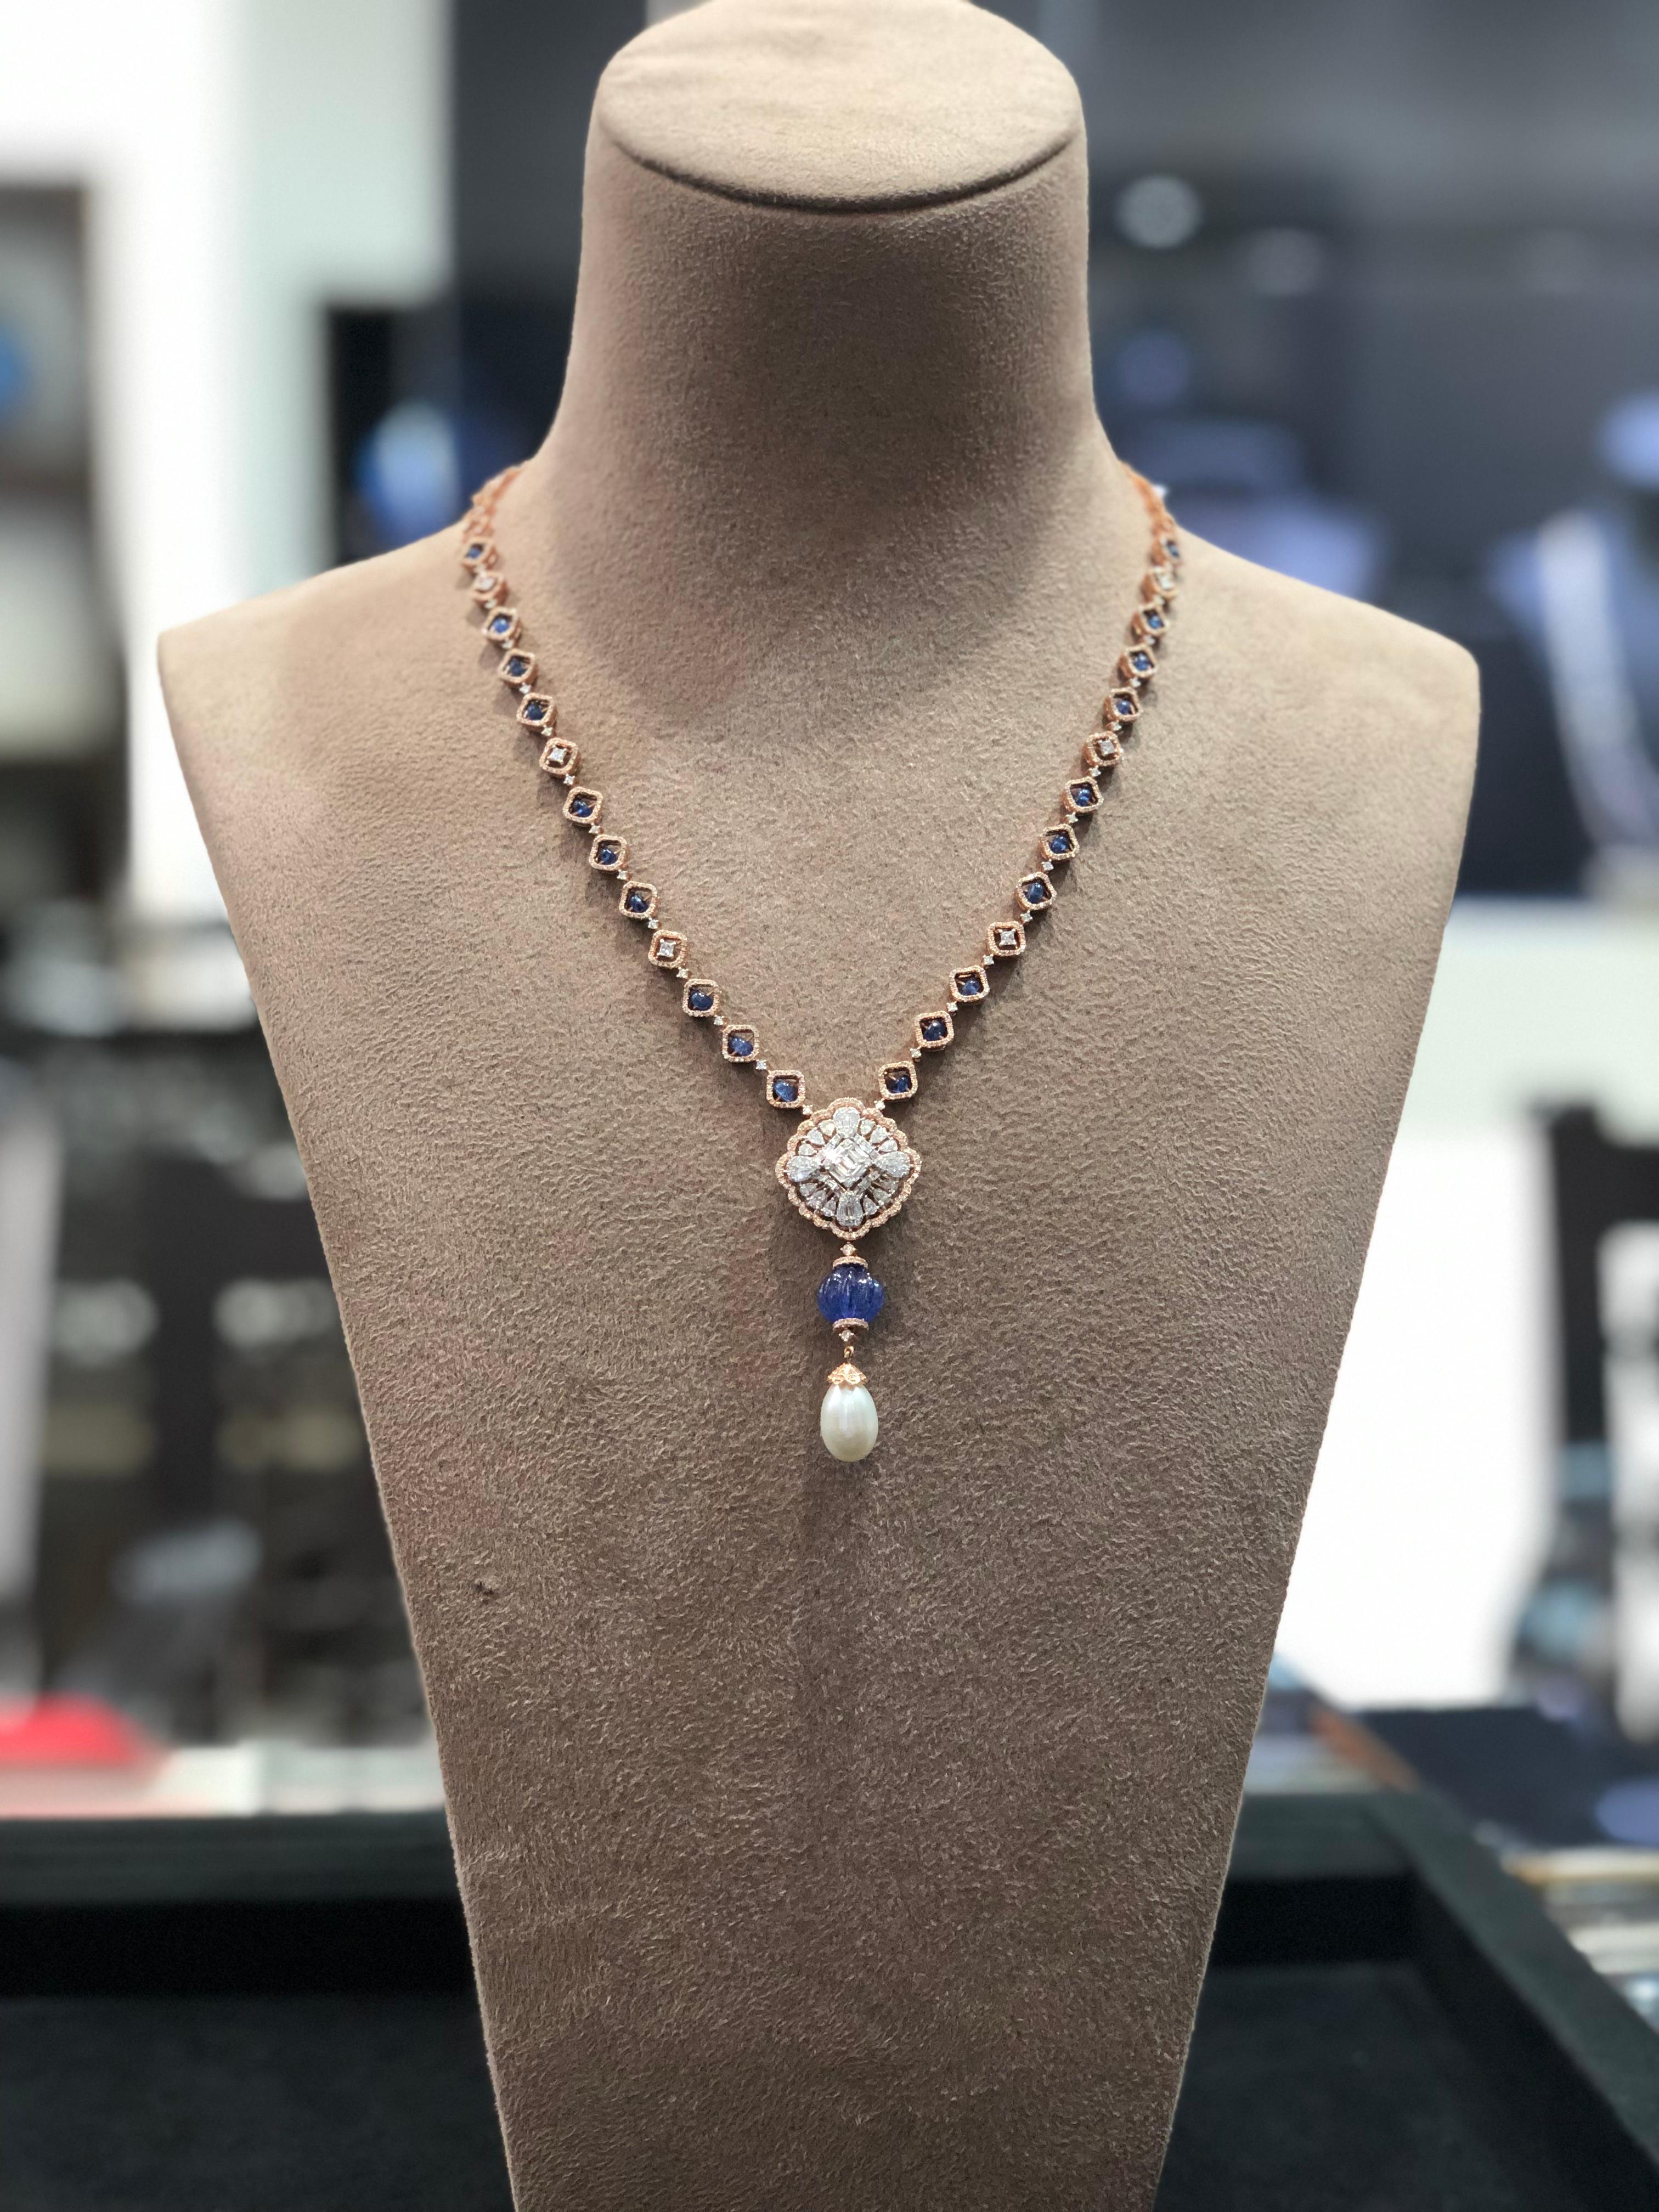 18kt rose gold, sapphire, tanzanite, pearl and diamond chain necklace.
An impressive diamond and gem stone chain necklace for those who like to push that modern edge of minimalist and geometric inspired jewellery into their wardrobe.

Diamonds: 